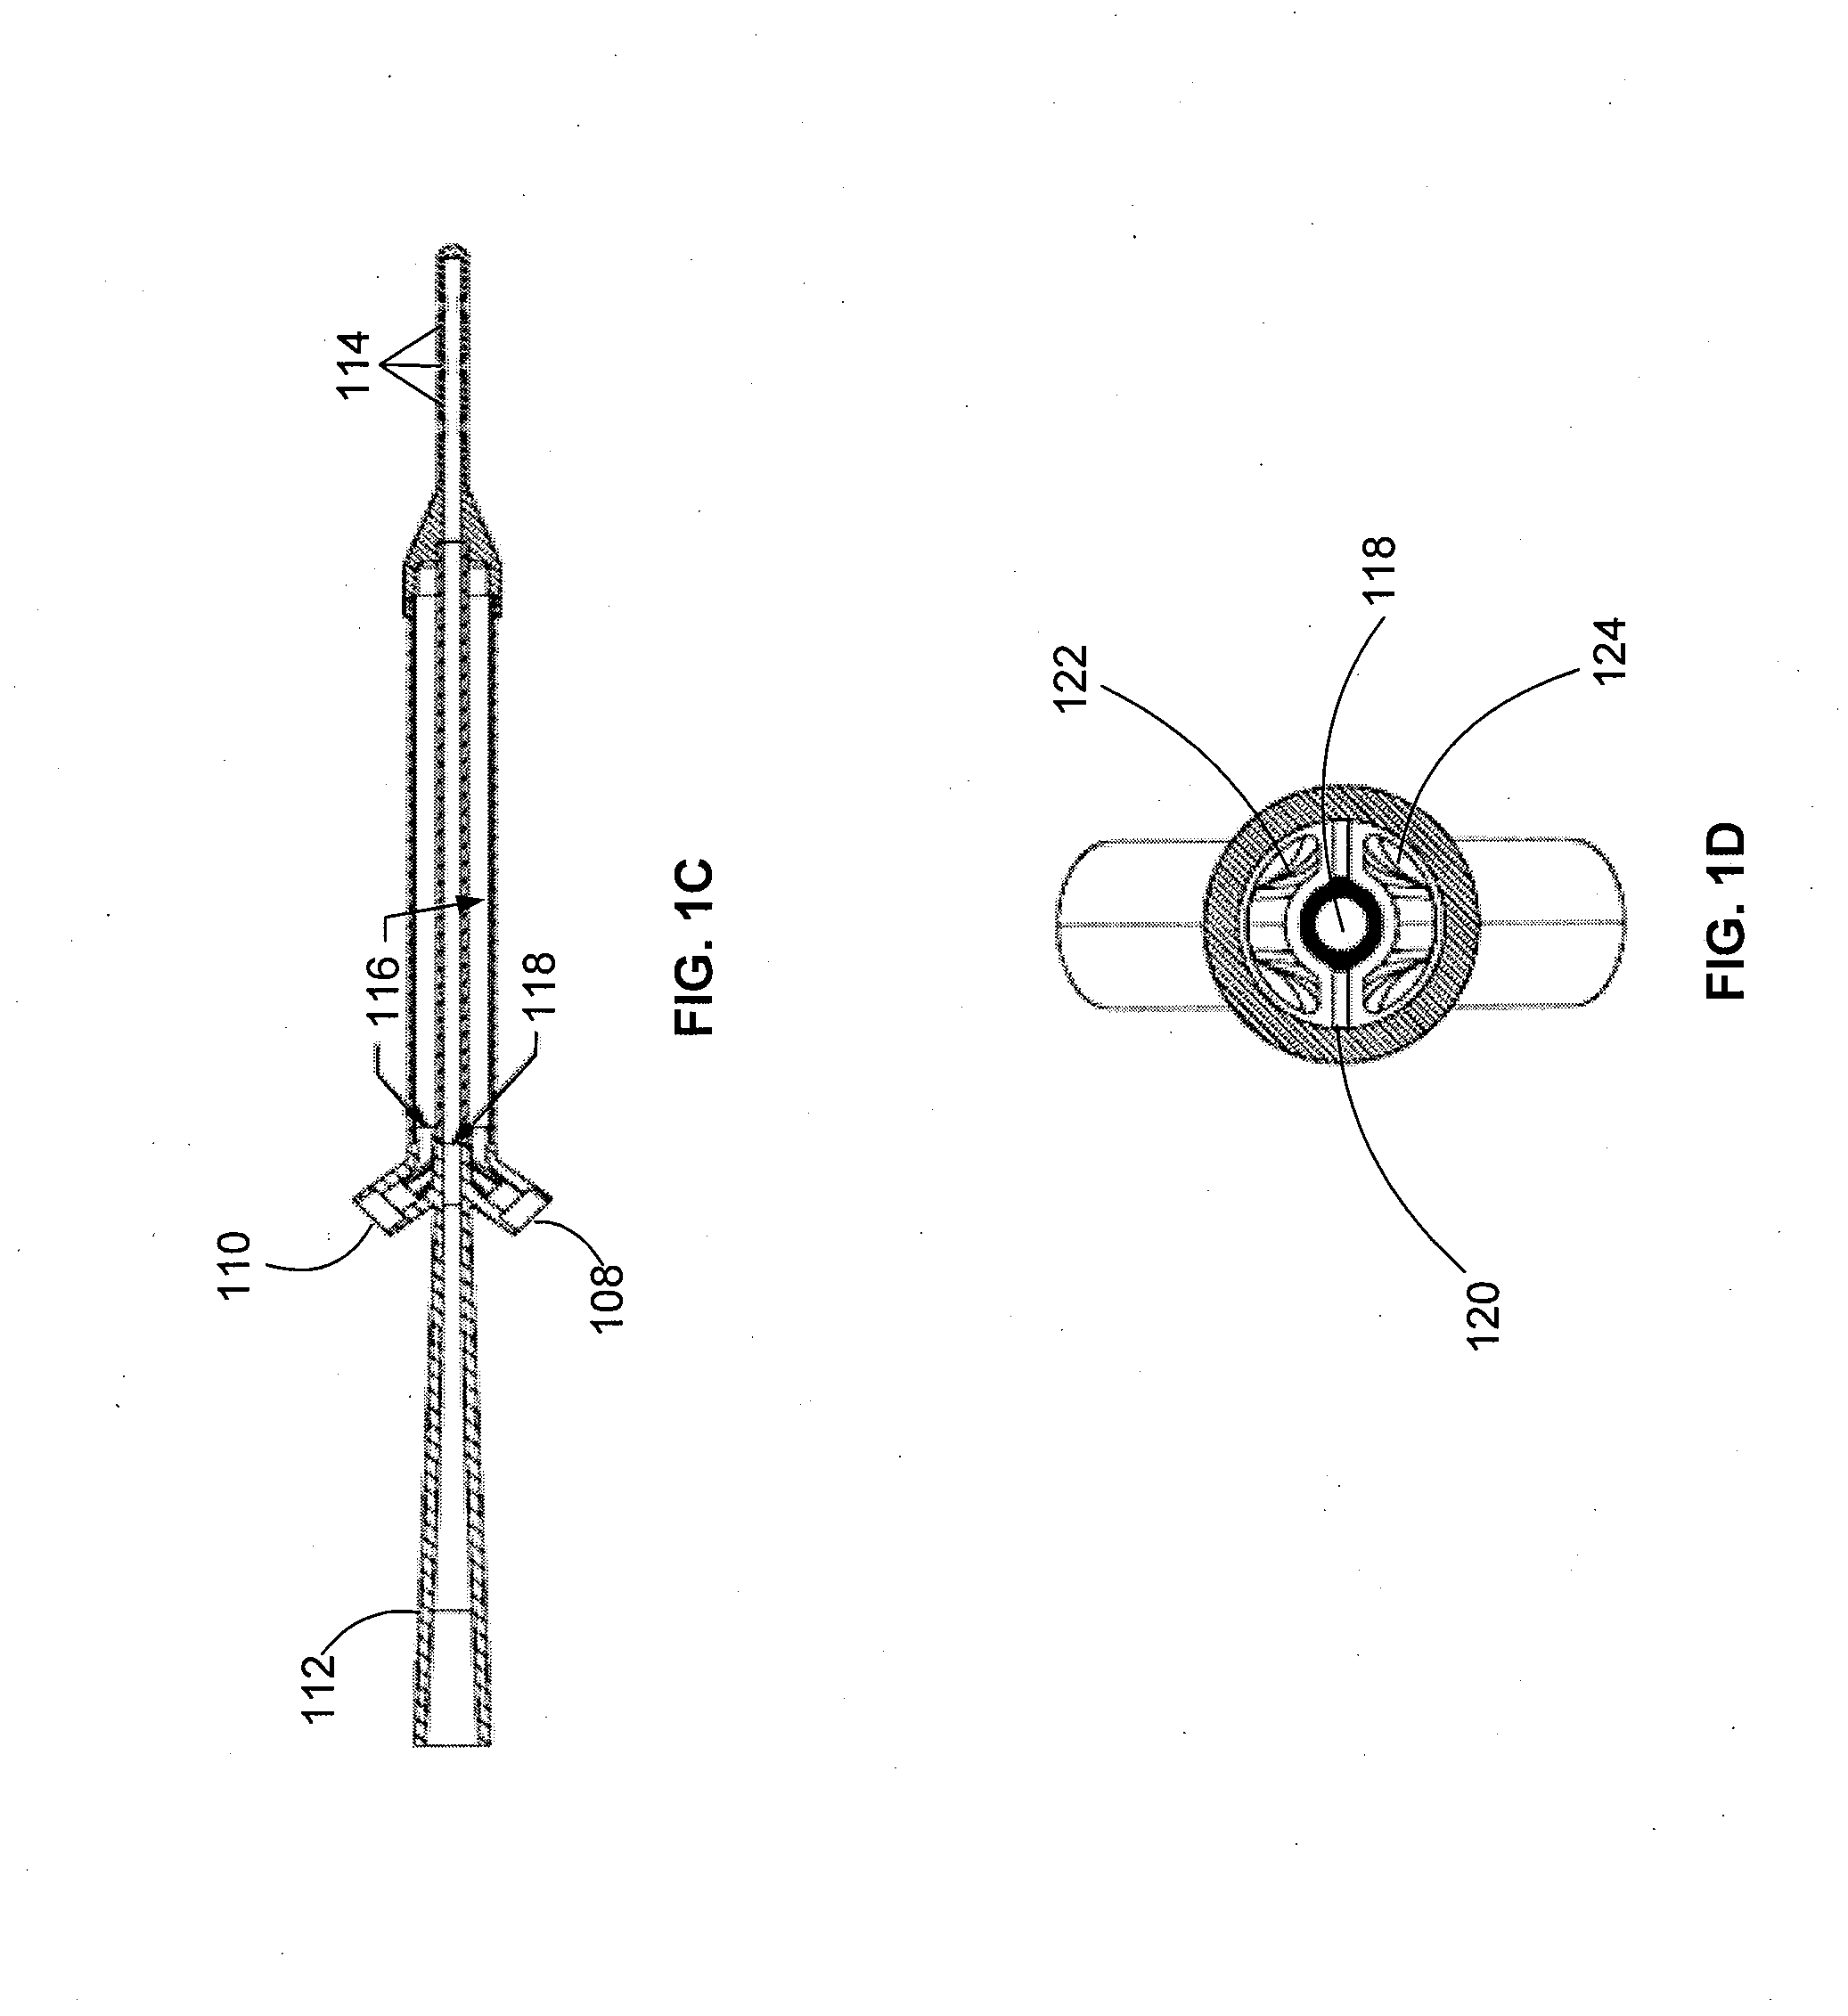 Devices, Systems, and Methods for Managing Patient Temperature and Correcting Cardiac Arrhythmia